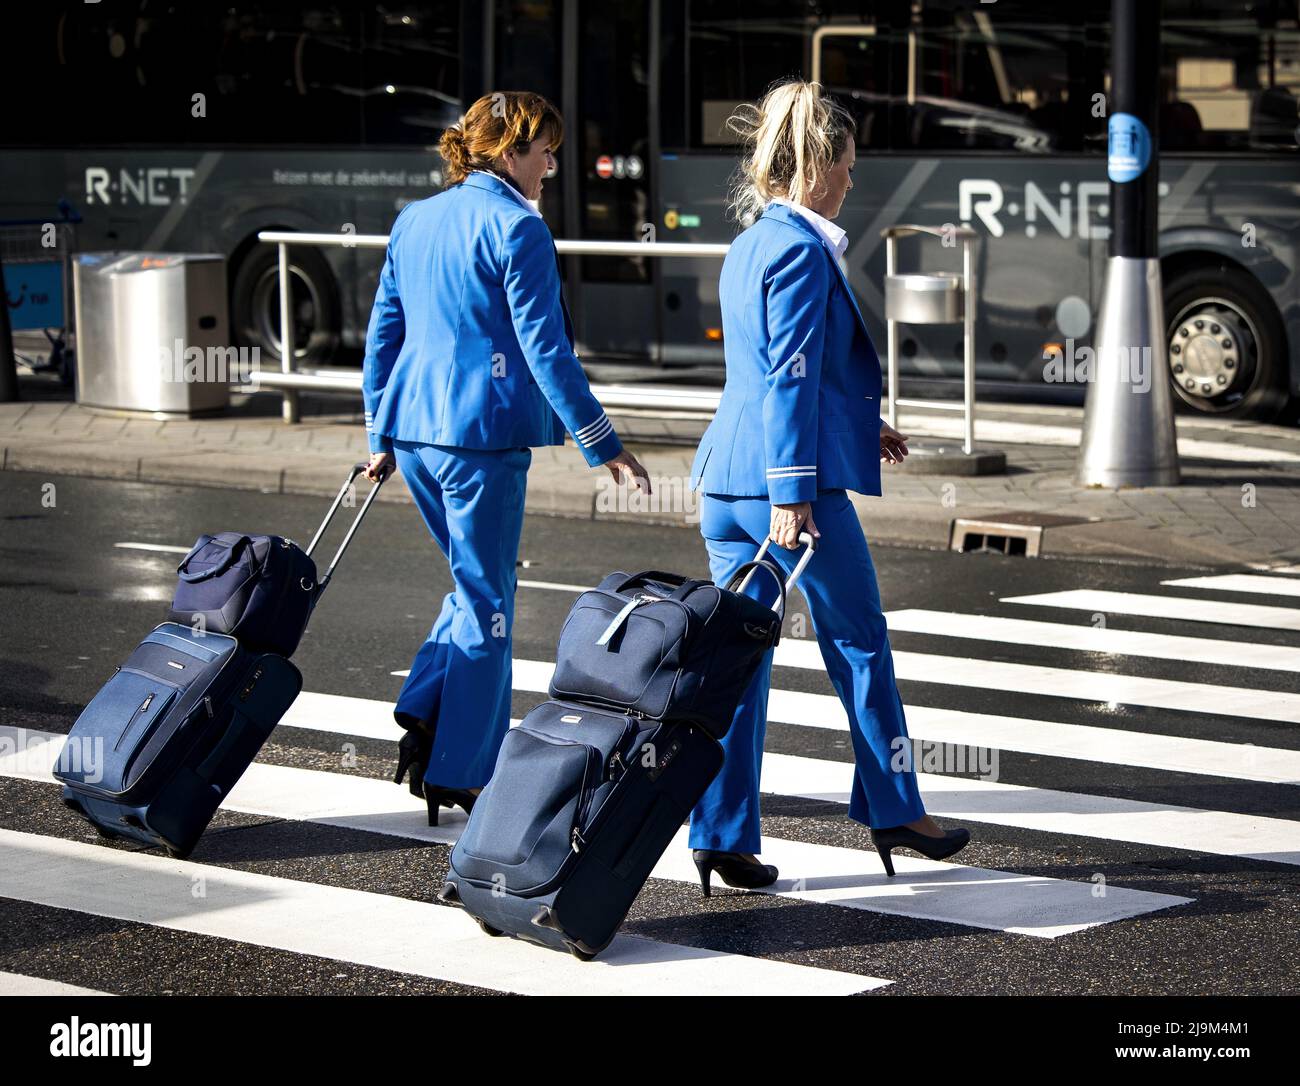 SCHIPHOL, Amsterdam, 2022-05-24 09:17:40 SCHIPHOL - KLM flight attendants walk across Schiphol Airport. Aviation group Air France-KLM wants to raise almost 2.3 billion euros with the issue of shares to pay back the state aid received during the corona crisis more quickly and to strengthen its balance sheet. ANP RAMON VAN FLYMEN netherlands out - belgium out Stock Photo